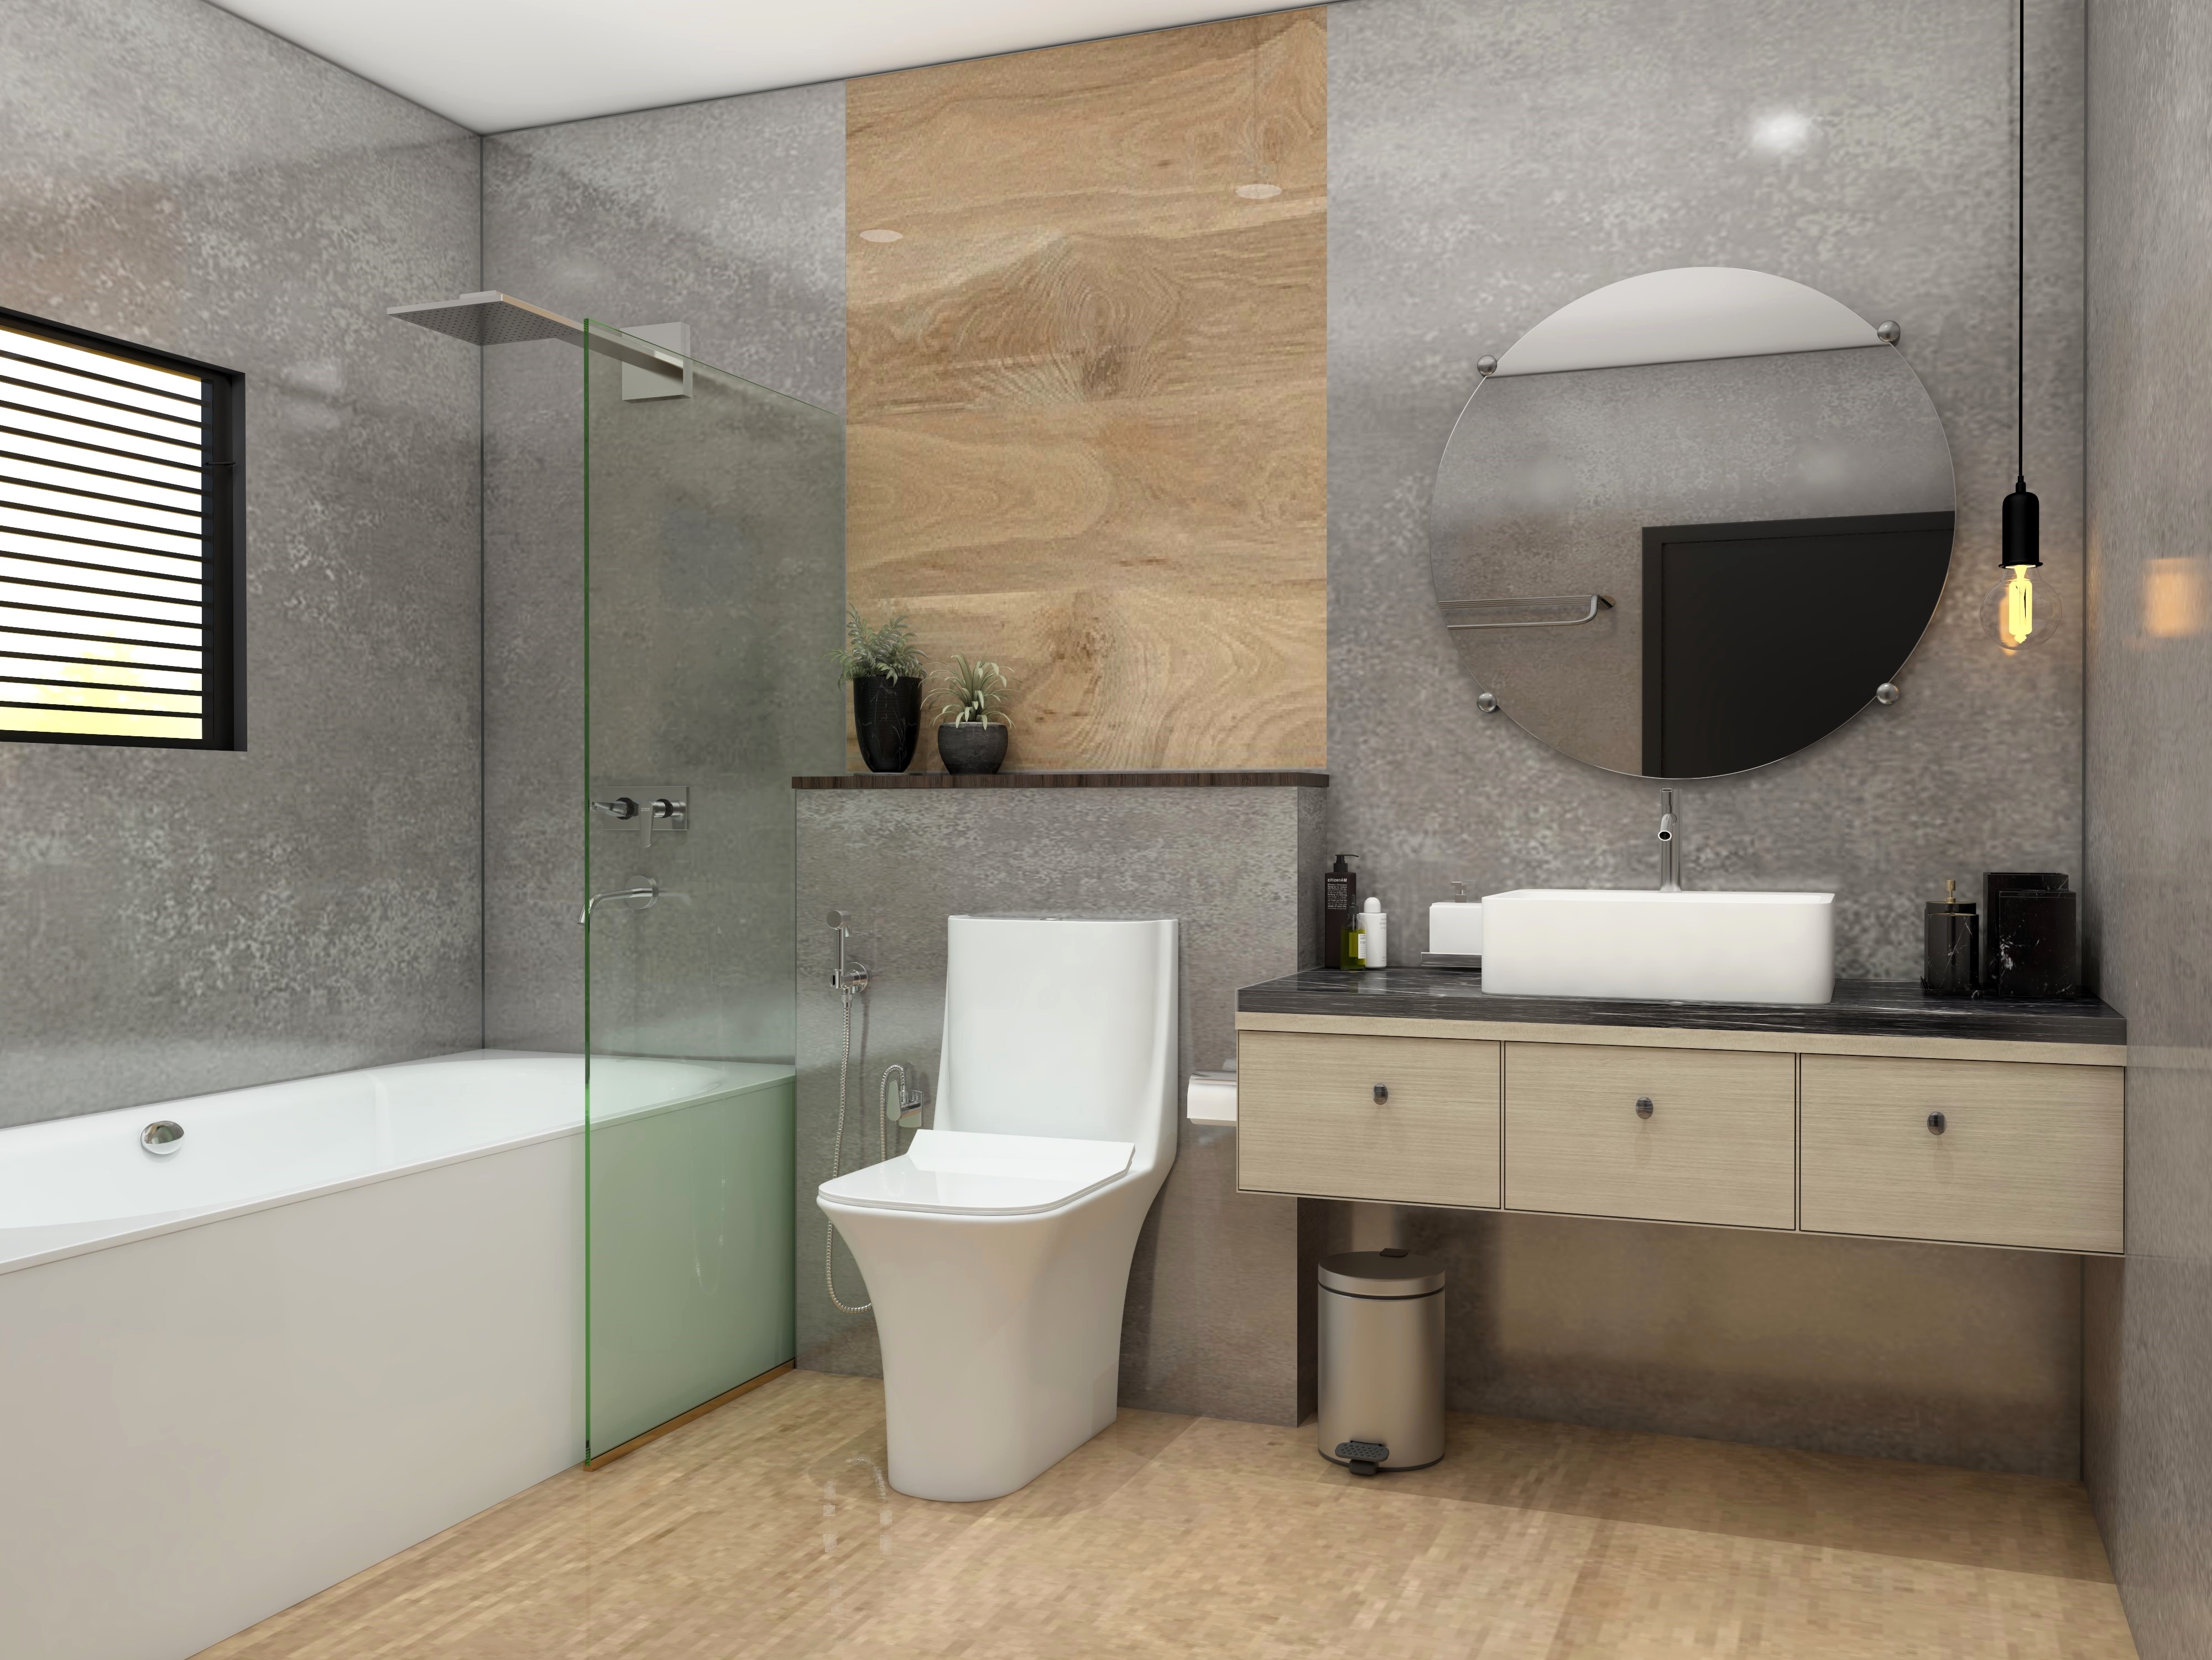 Simple bathroom with seamless grey wall tiles and wooden finish flooring - Beautiful Homes